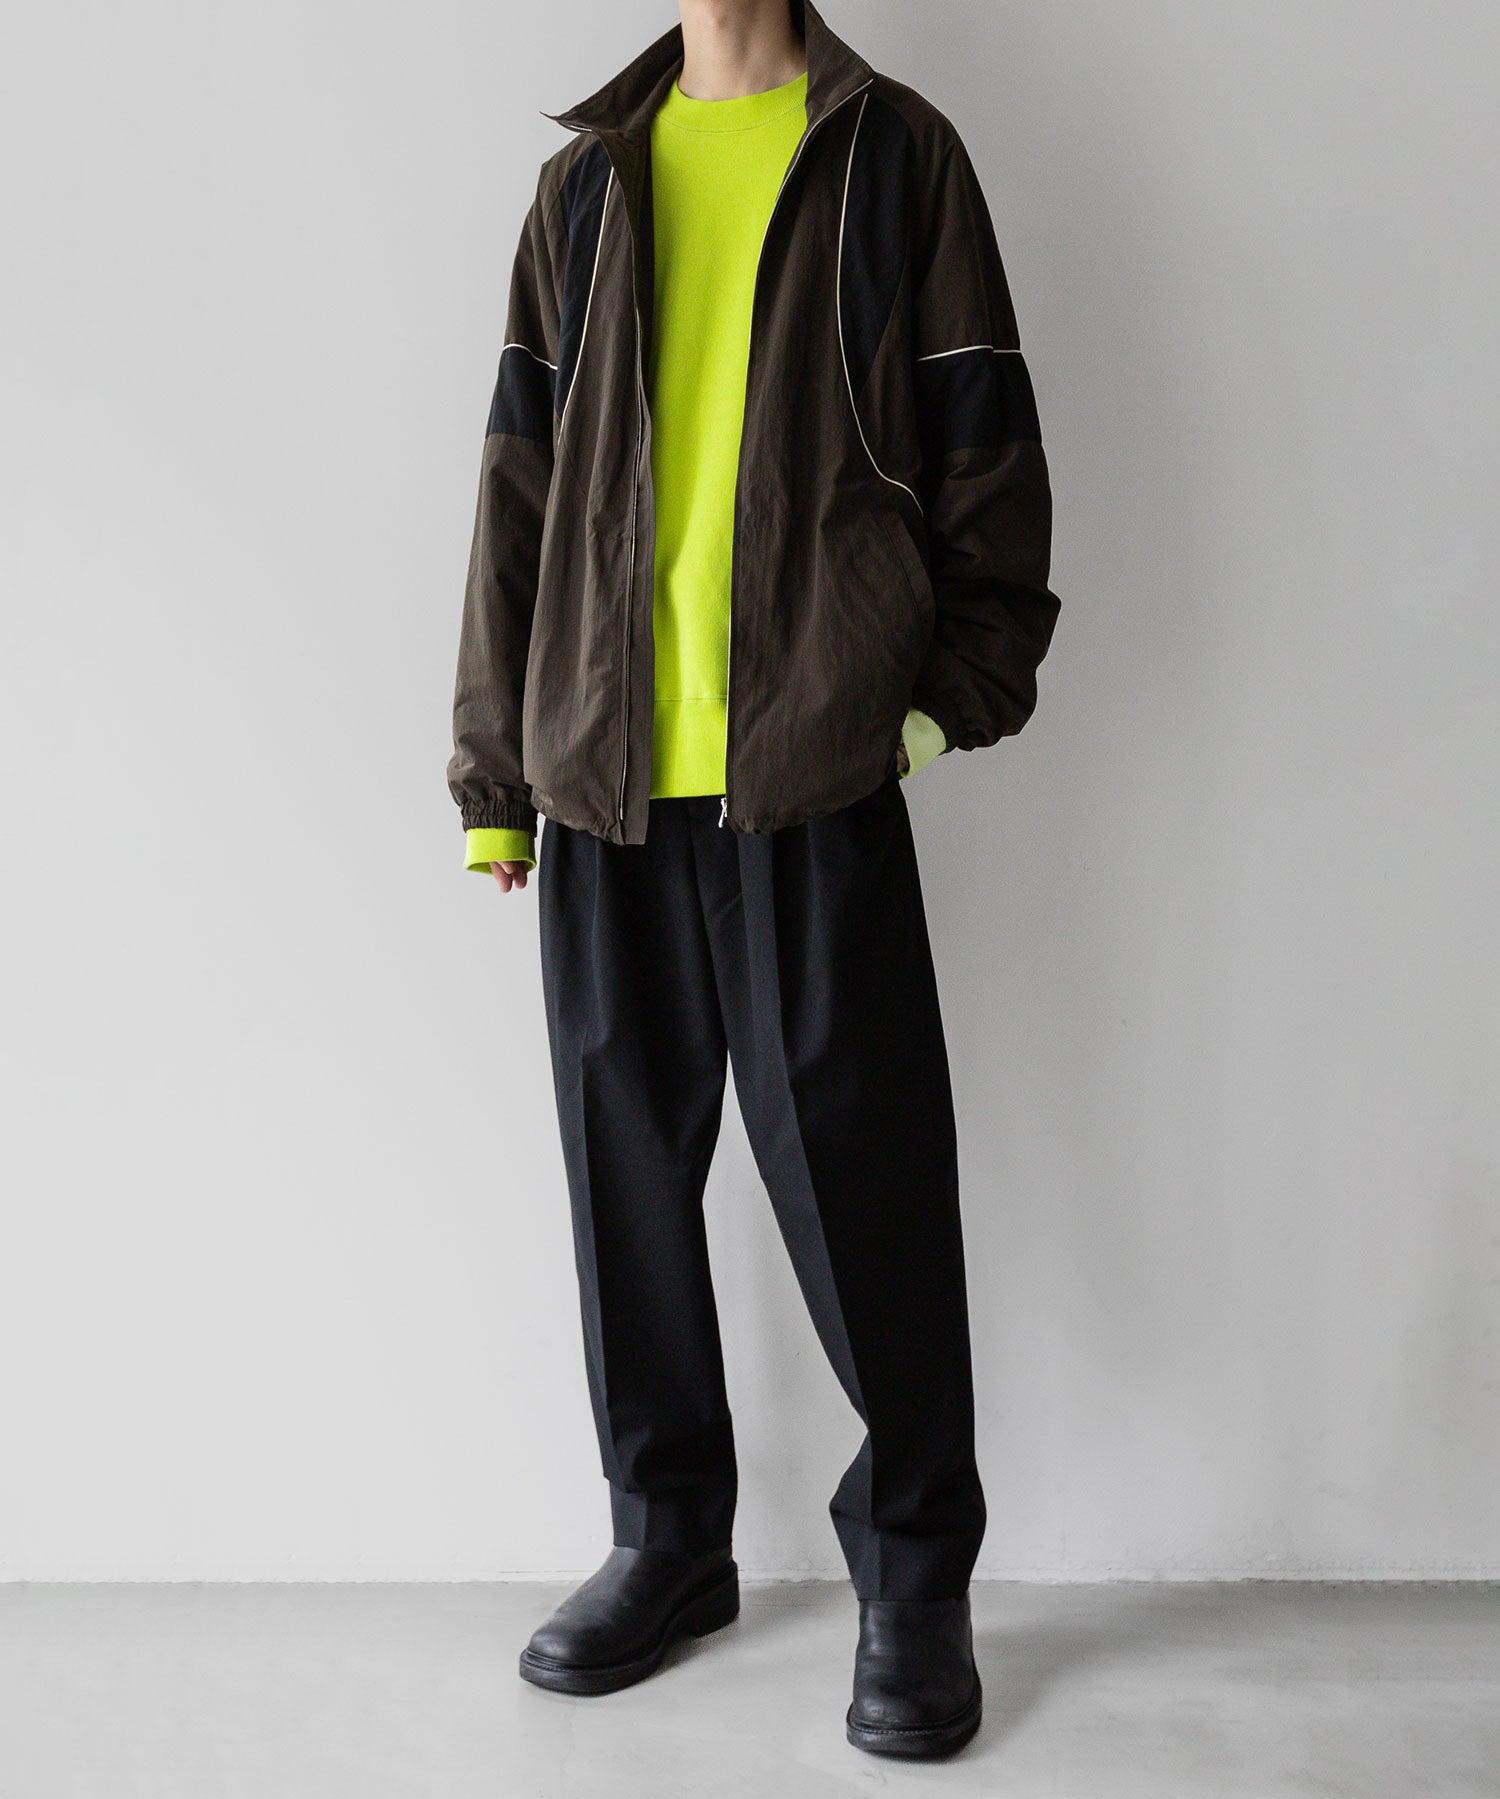 stein / シュタイン】DOUBLE WIDE TROUSERS - BLACK | 公式通販サイト 